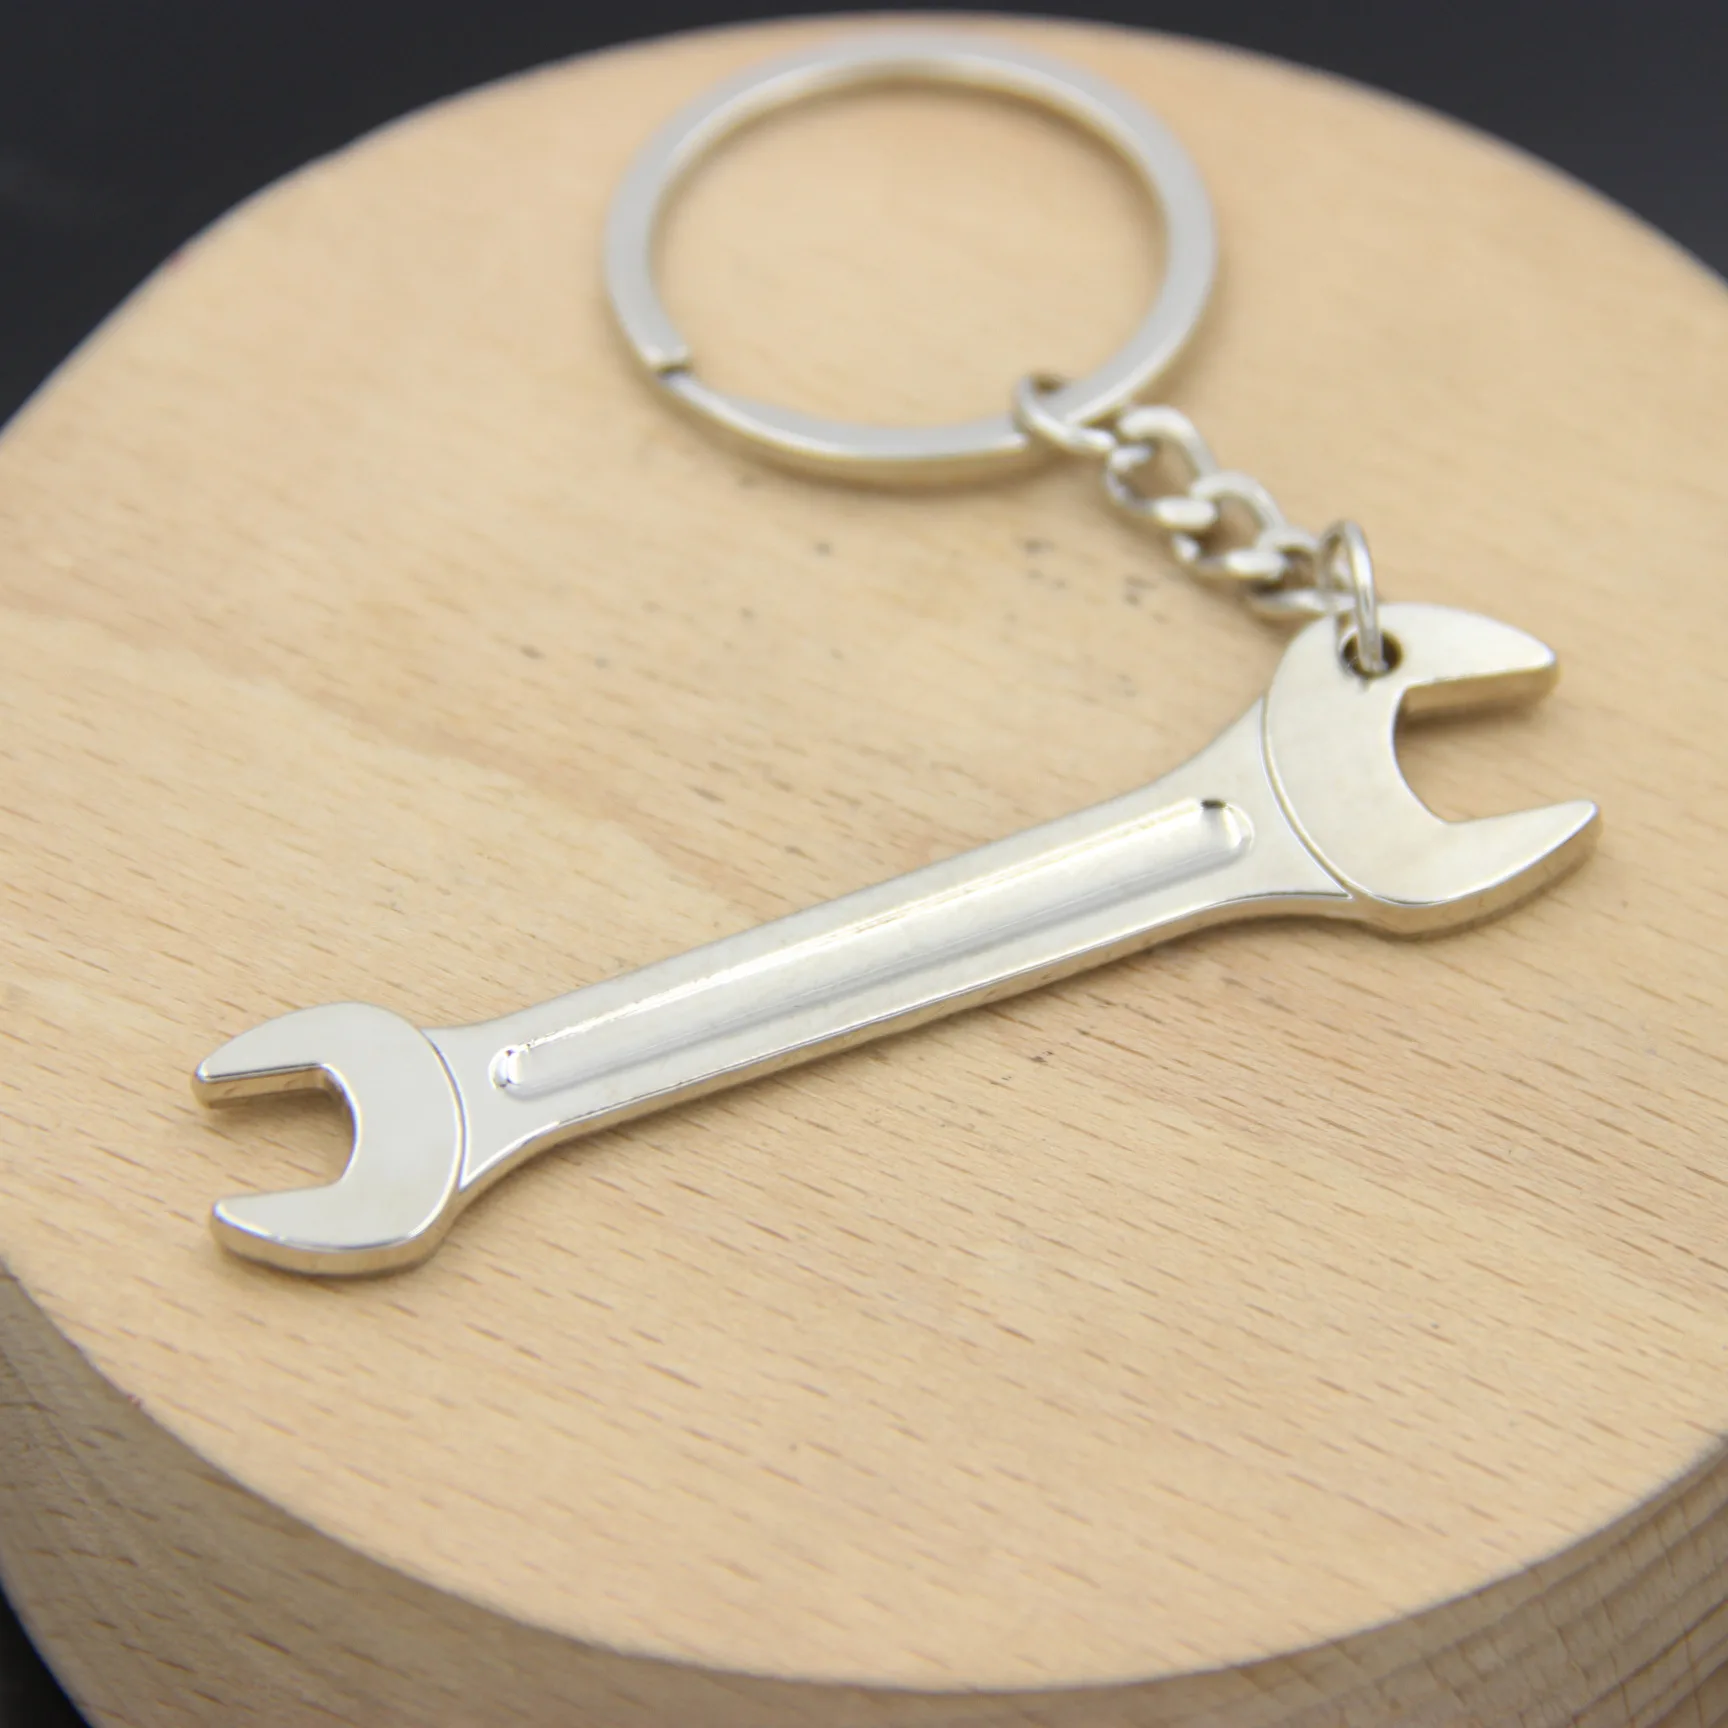 wholesale wrench key chain practical metal